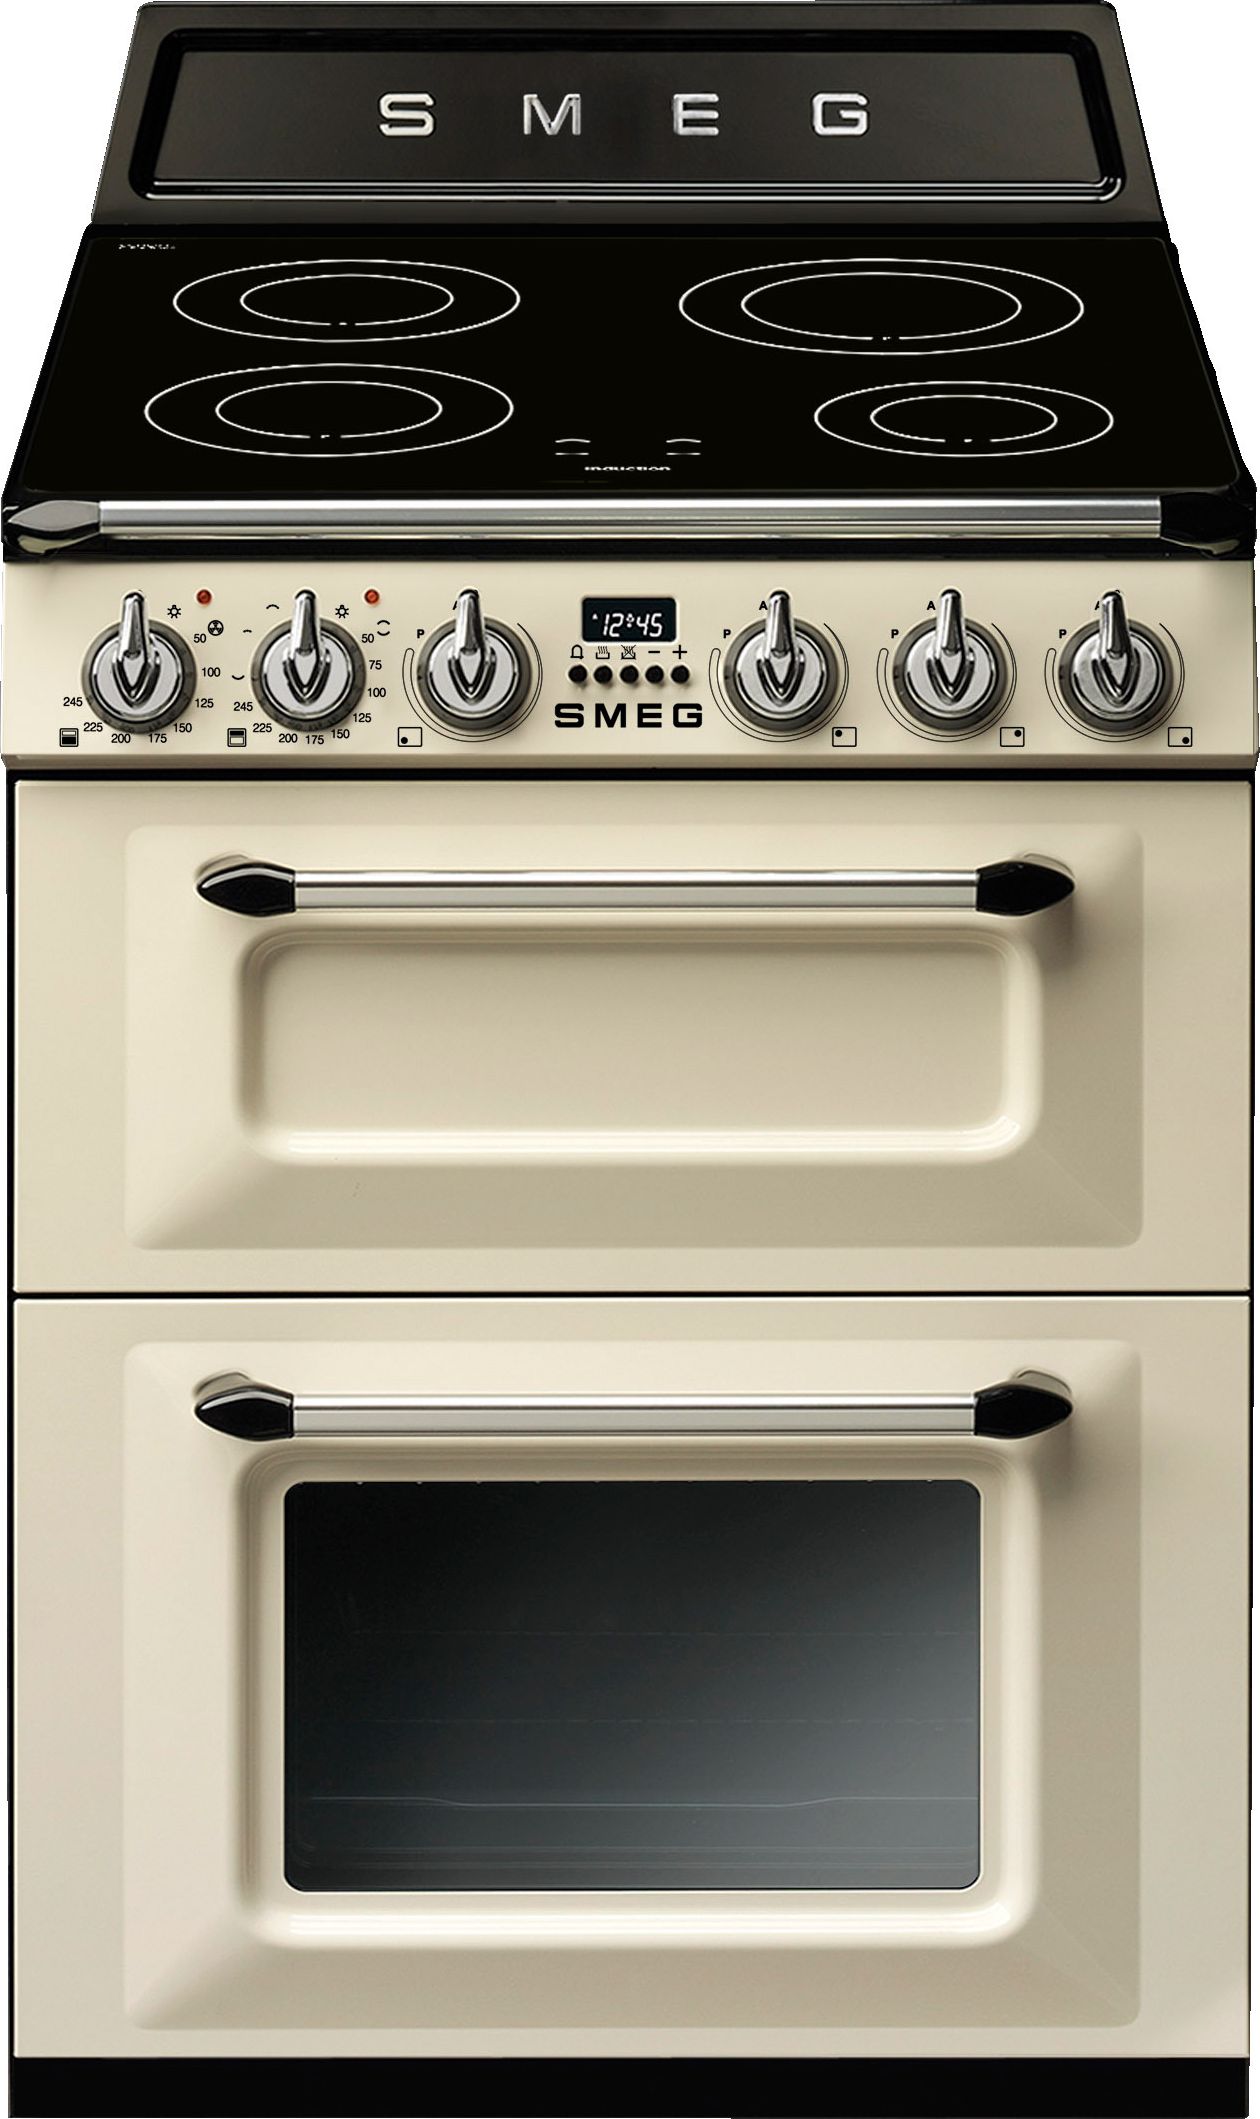 Smeg Victoria TR62IP2 60cm Electric Cooker with Induction Hob - Cream - A/A Rated, Cream